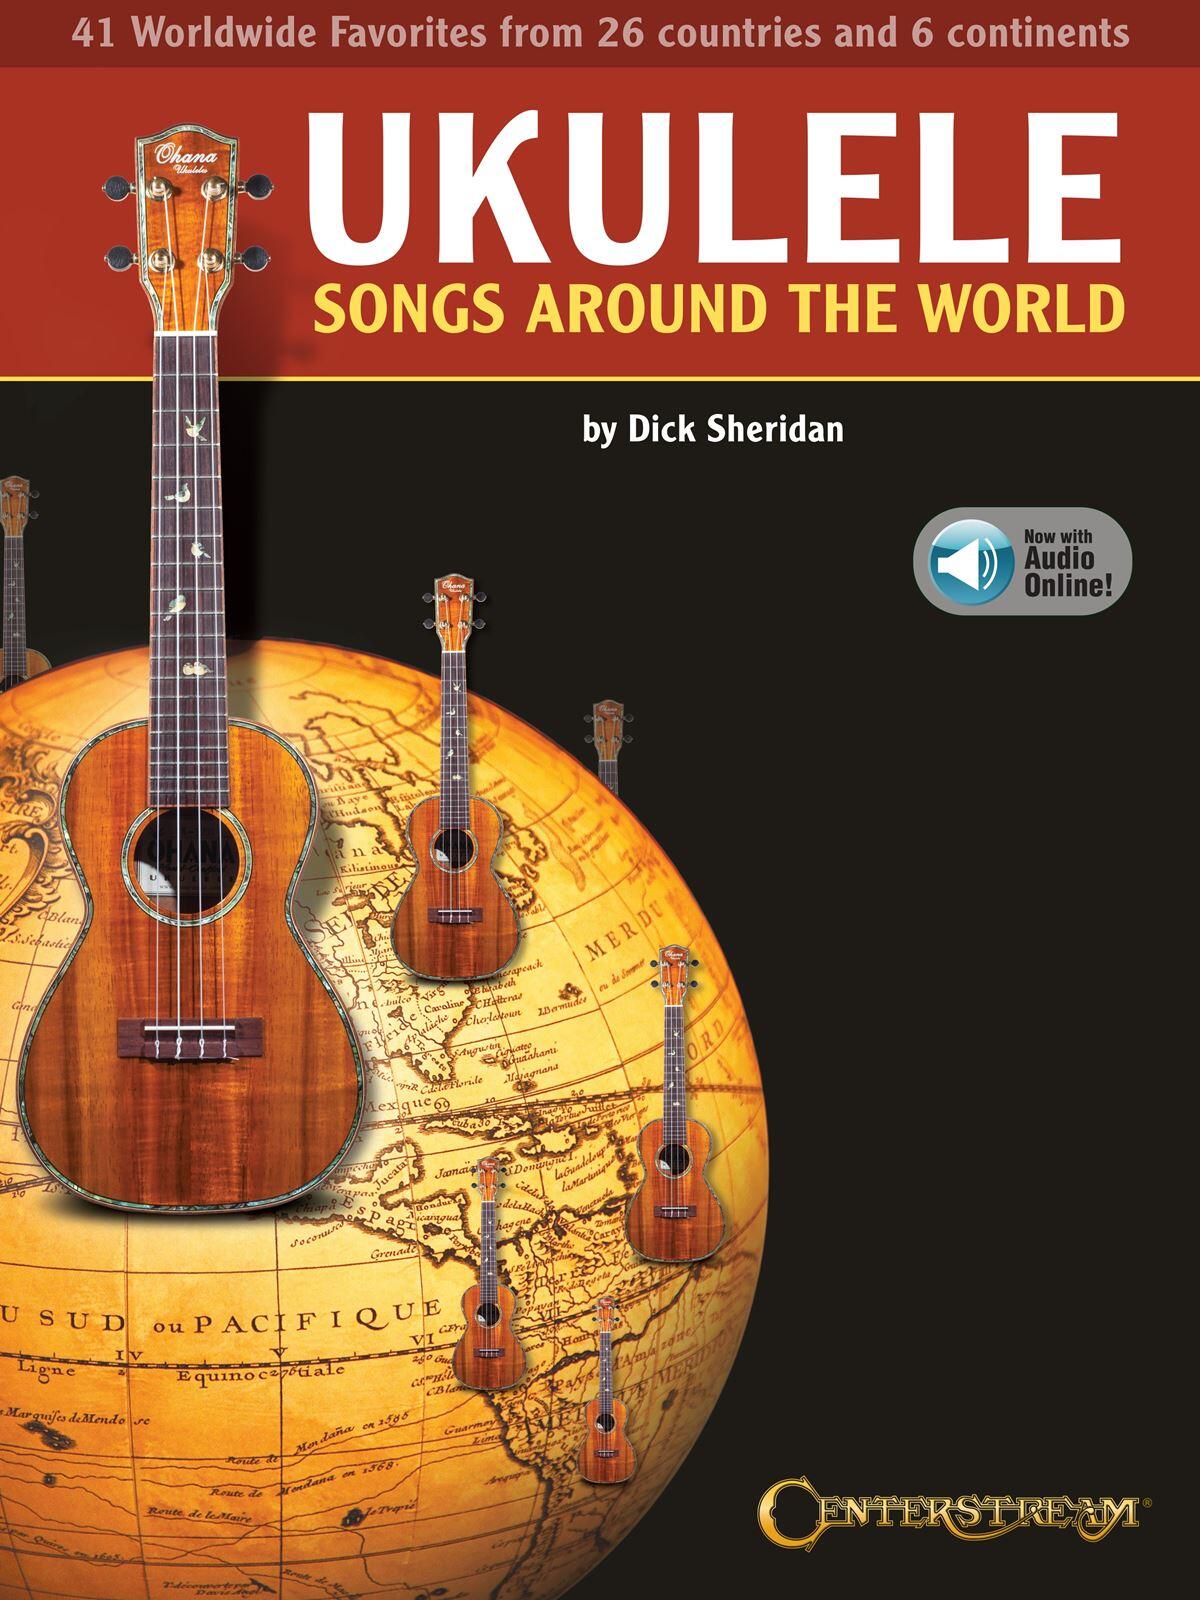 Centerstream Publications Ukulele Songs Around the World 41 World Wide Favorites from 27 Countries and 5 Continents : photo 1